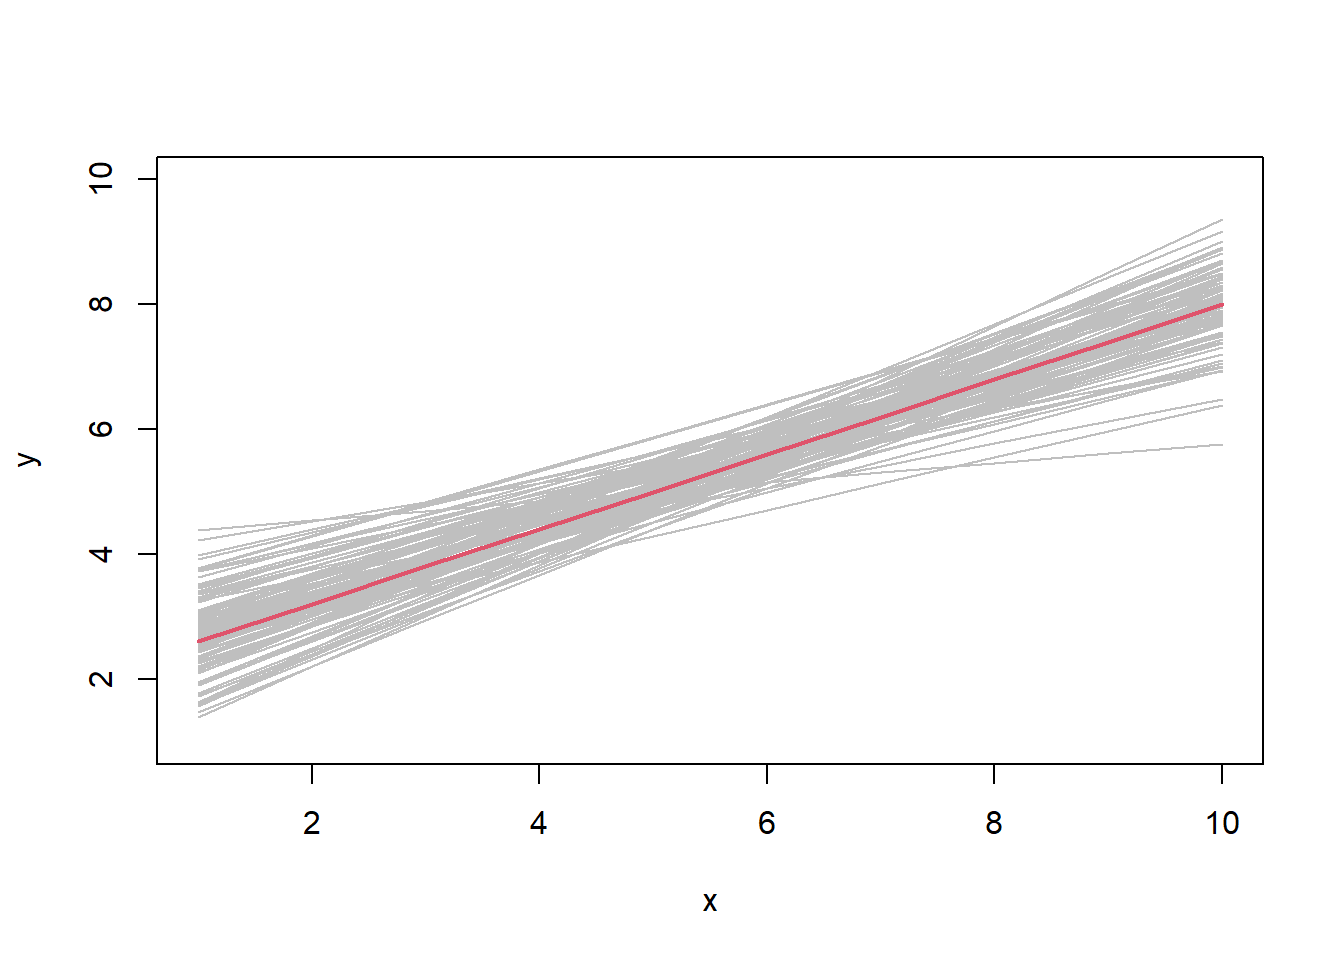 Estimated lines from 100 simulations with true line in red